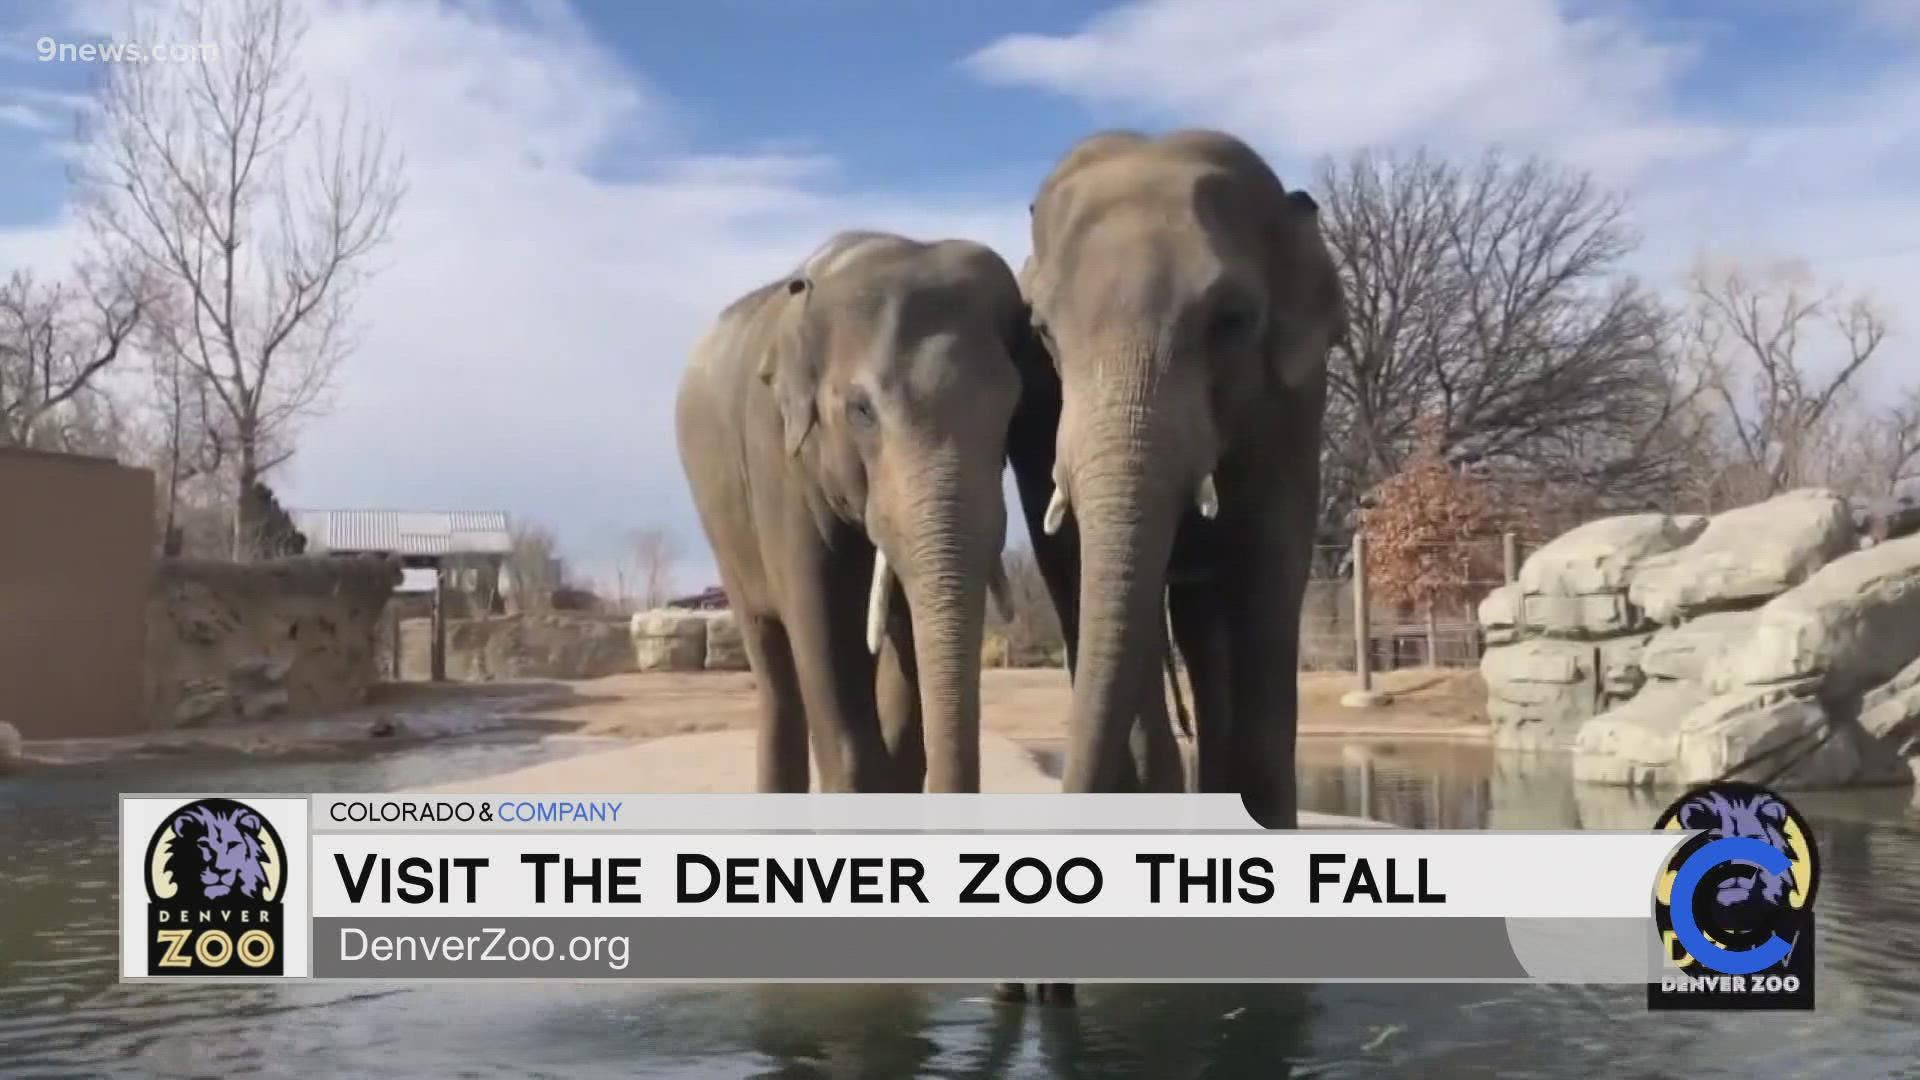 Fall is a great time to explore the Denver Zoo! Get your tickets online and learn more at DenverZoo.org.